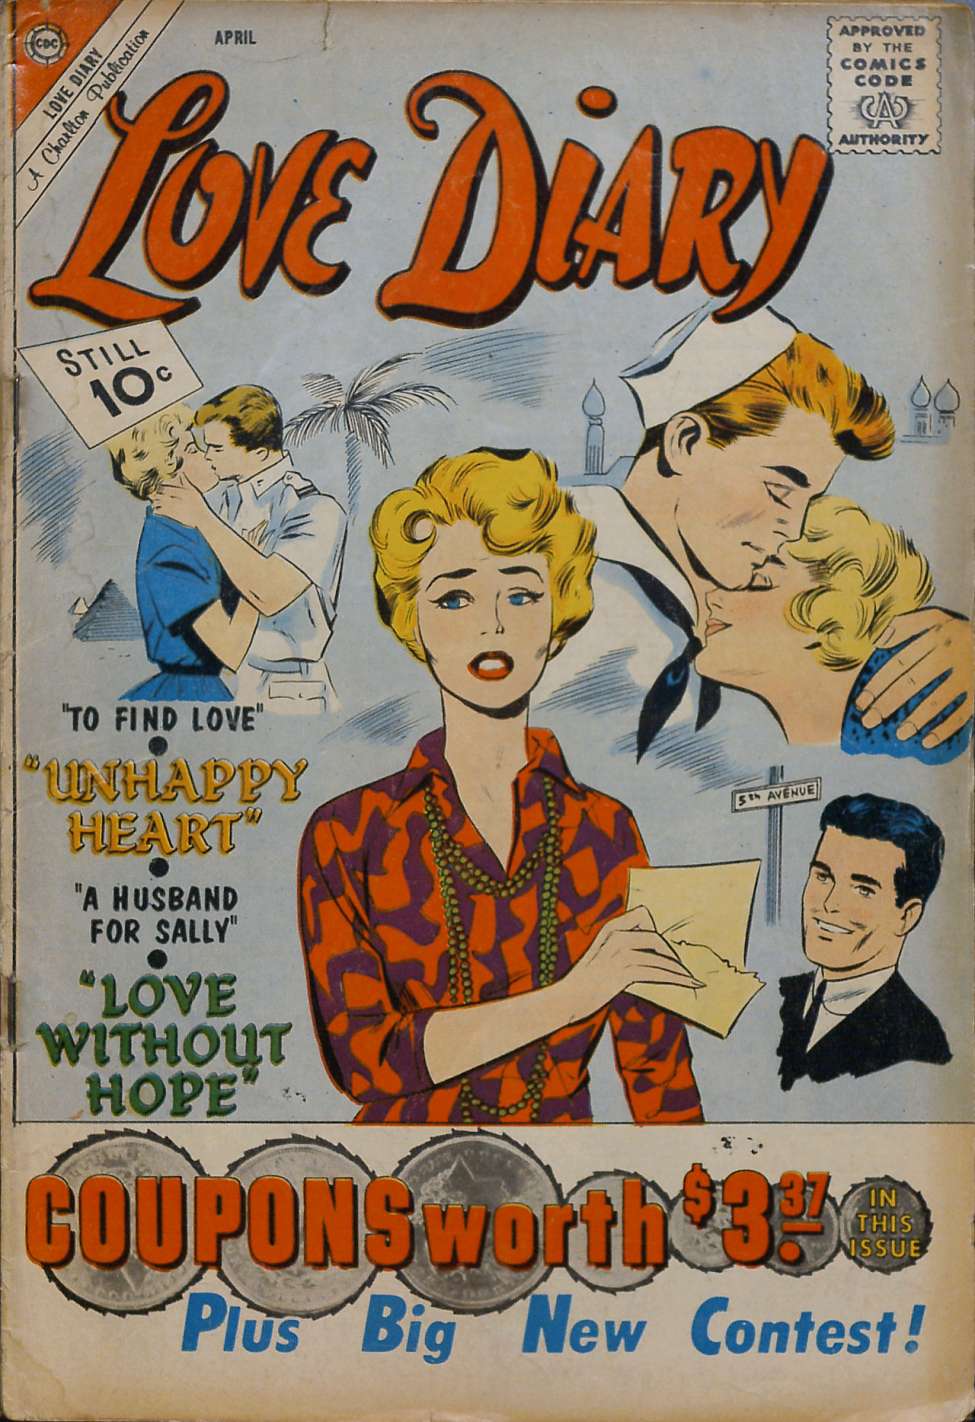 Comic Book Cover For Love Diary 15